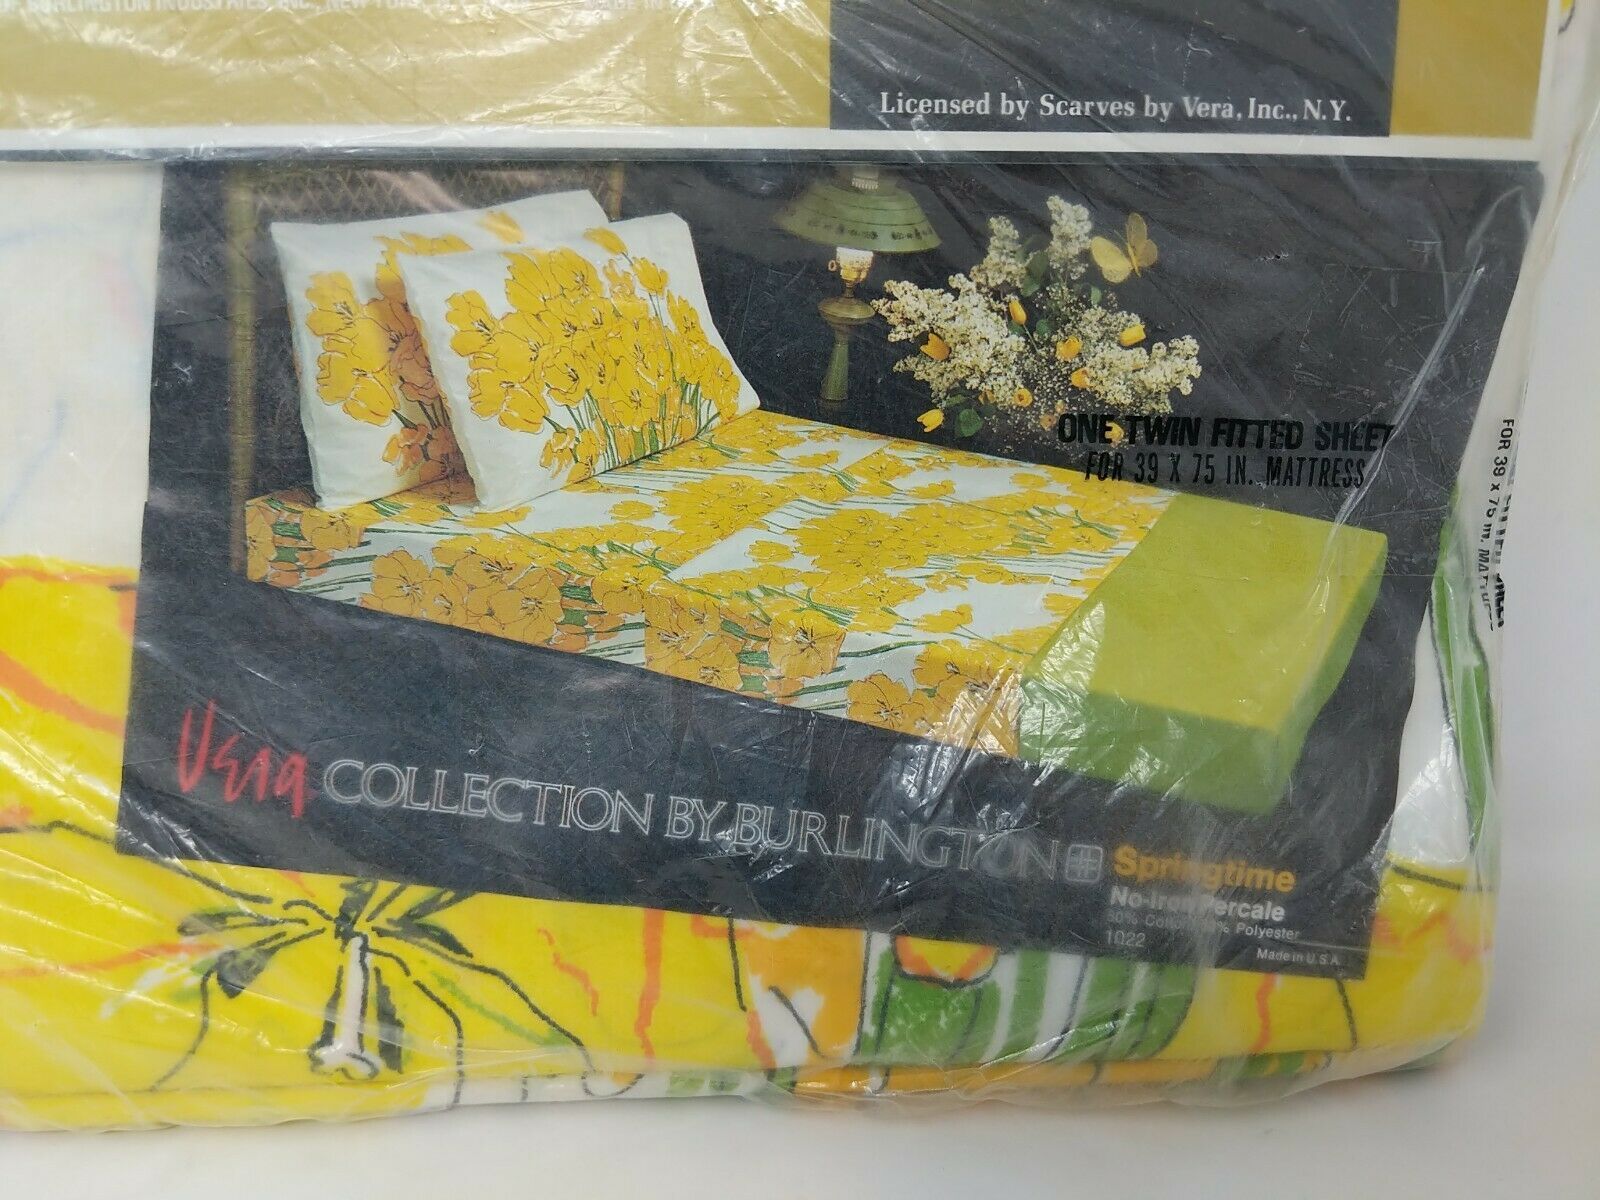 NEW VINTAGE VERA Collection by Burlington Extra Long Twin Flat Sheet Water Ways 